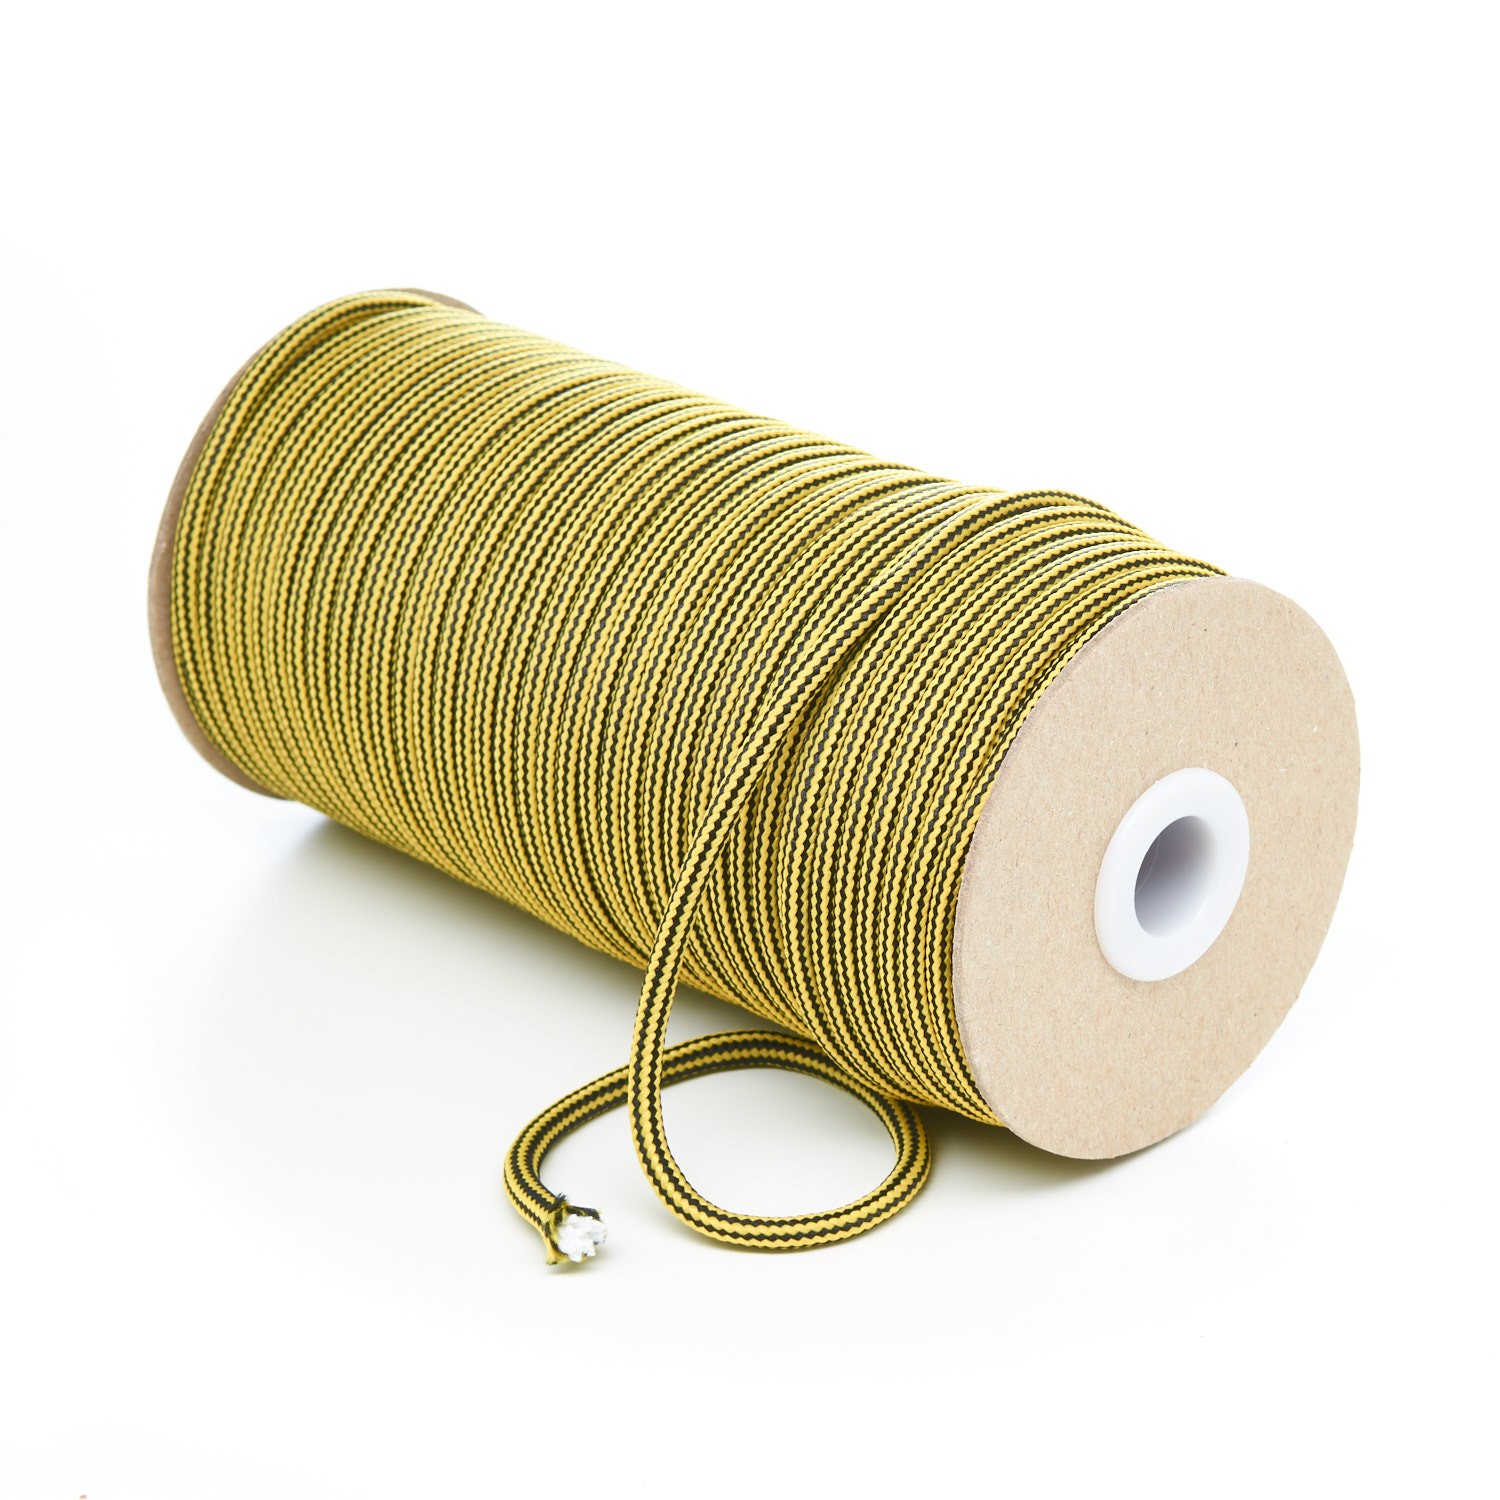 T621 Round Cord Stripes Yellow and Black Kalsi Cords